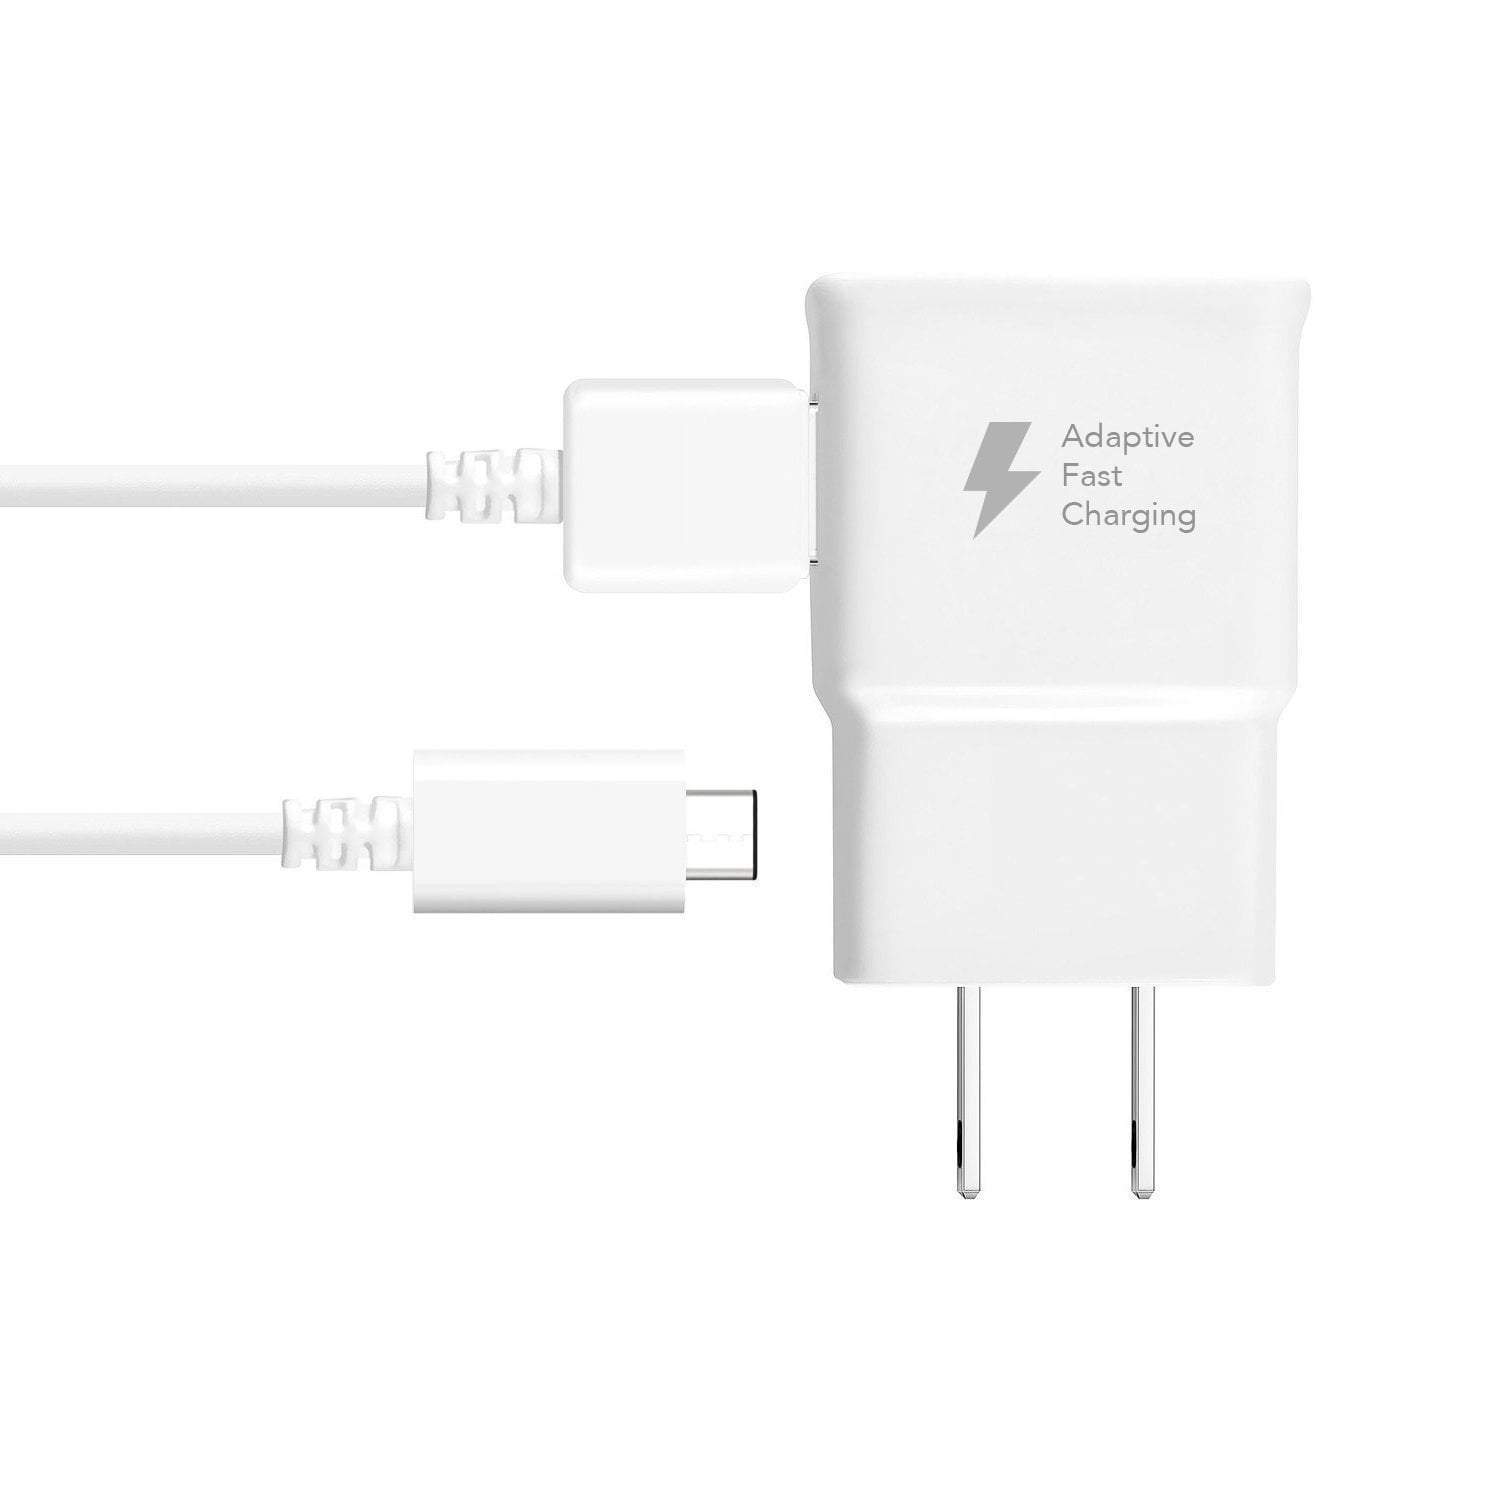 Adaptive Fast Charger Compatible with Motorola Moto Z Play Droid [Wall Charger + Type-C USB Cable] Dual voltages for up to 60% Faster Charging! WHITE - New